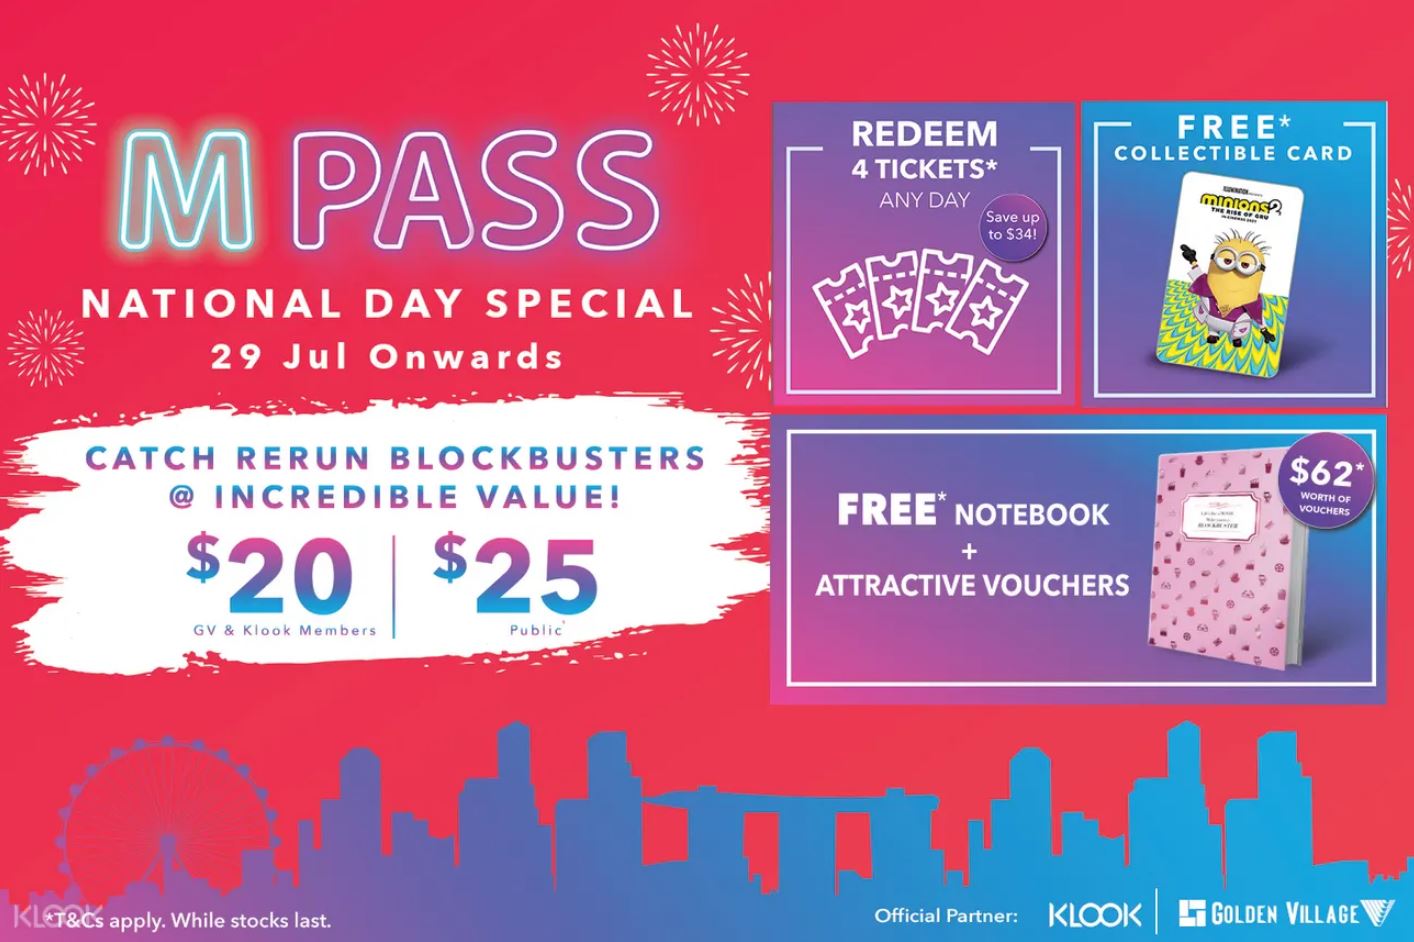 Golden Village’s $20 Movie Pass Lets You Watch Up To 8 Movie Titles - 2